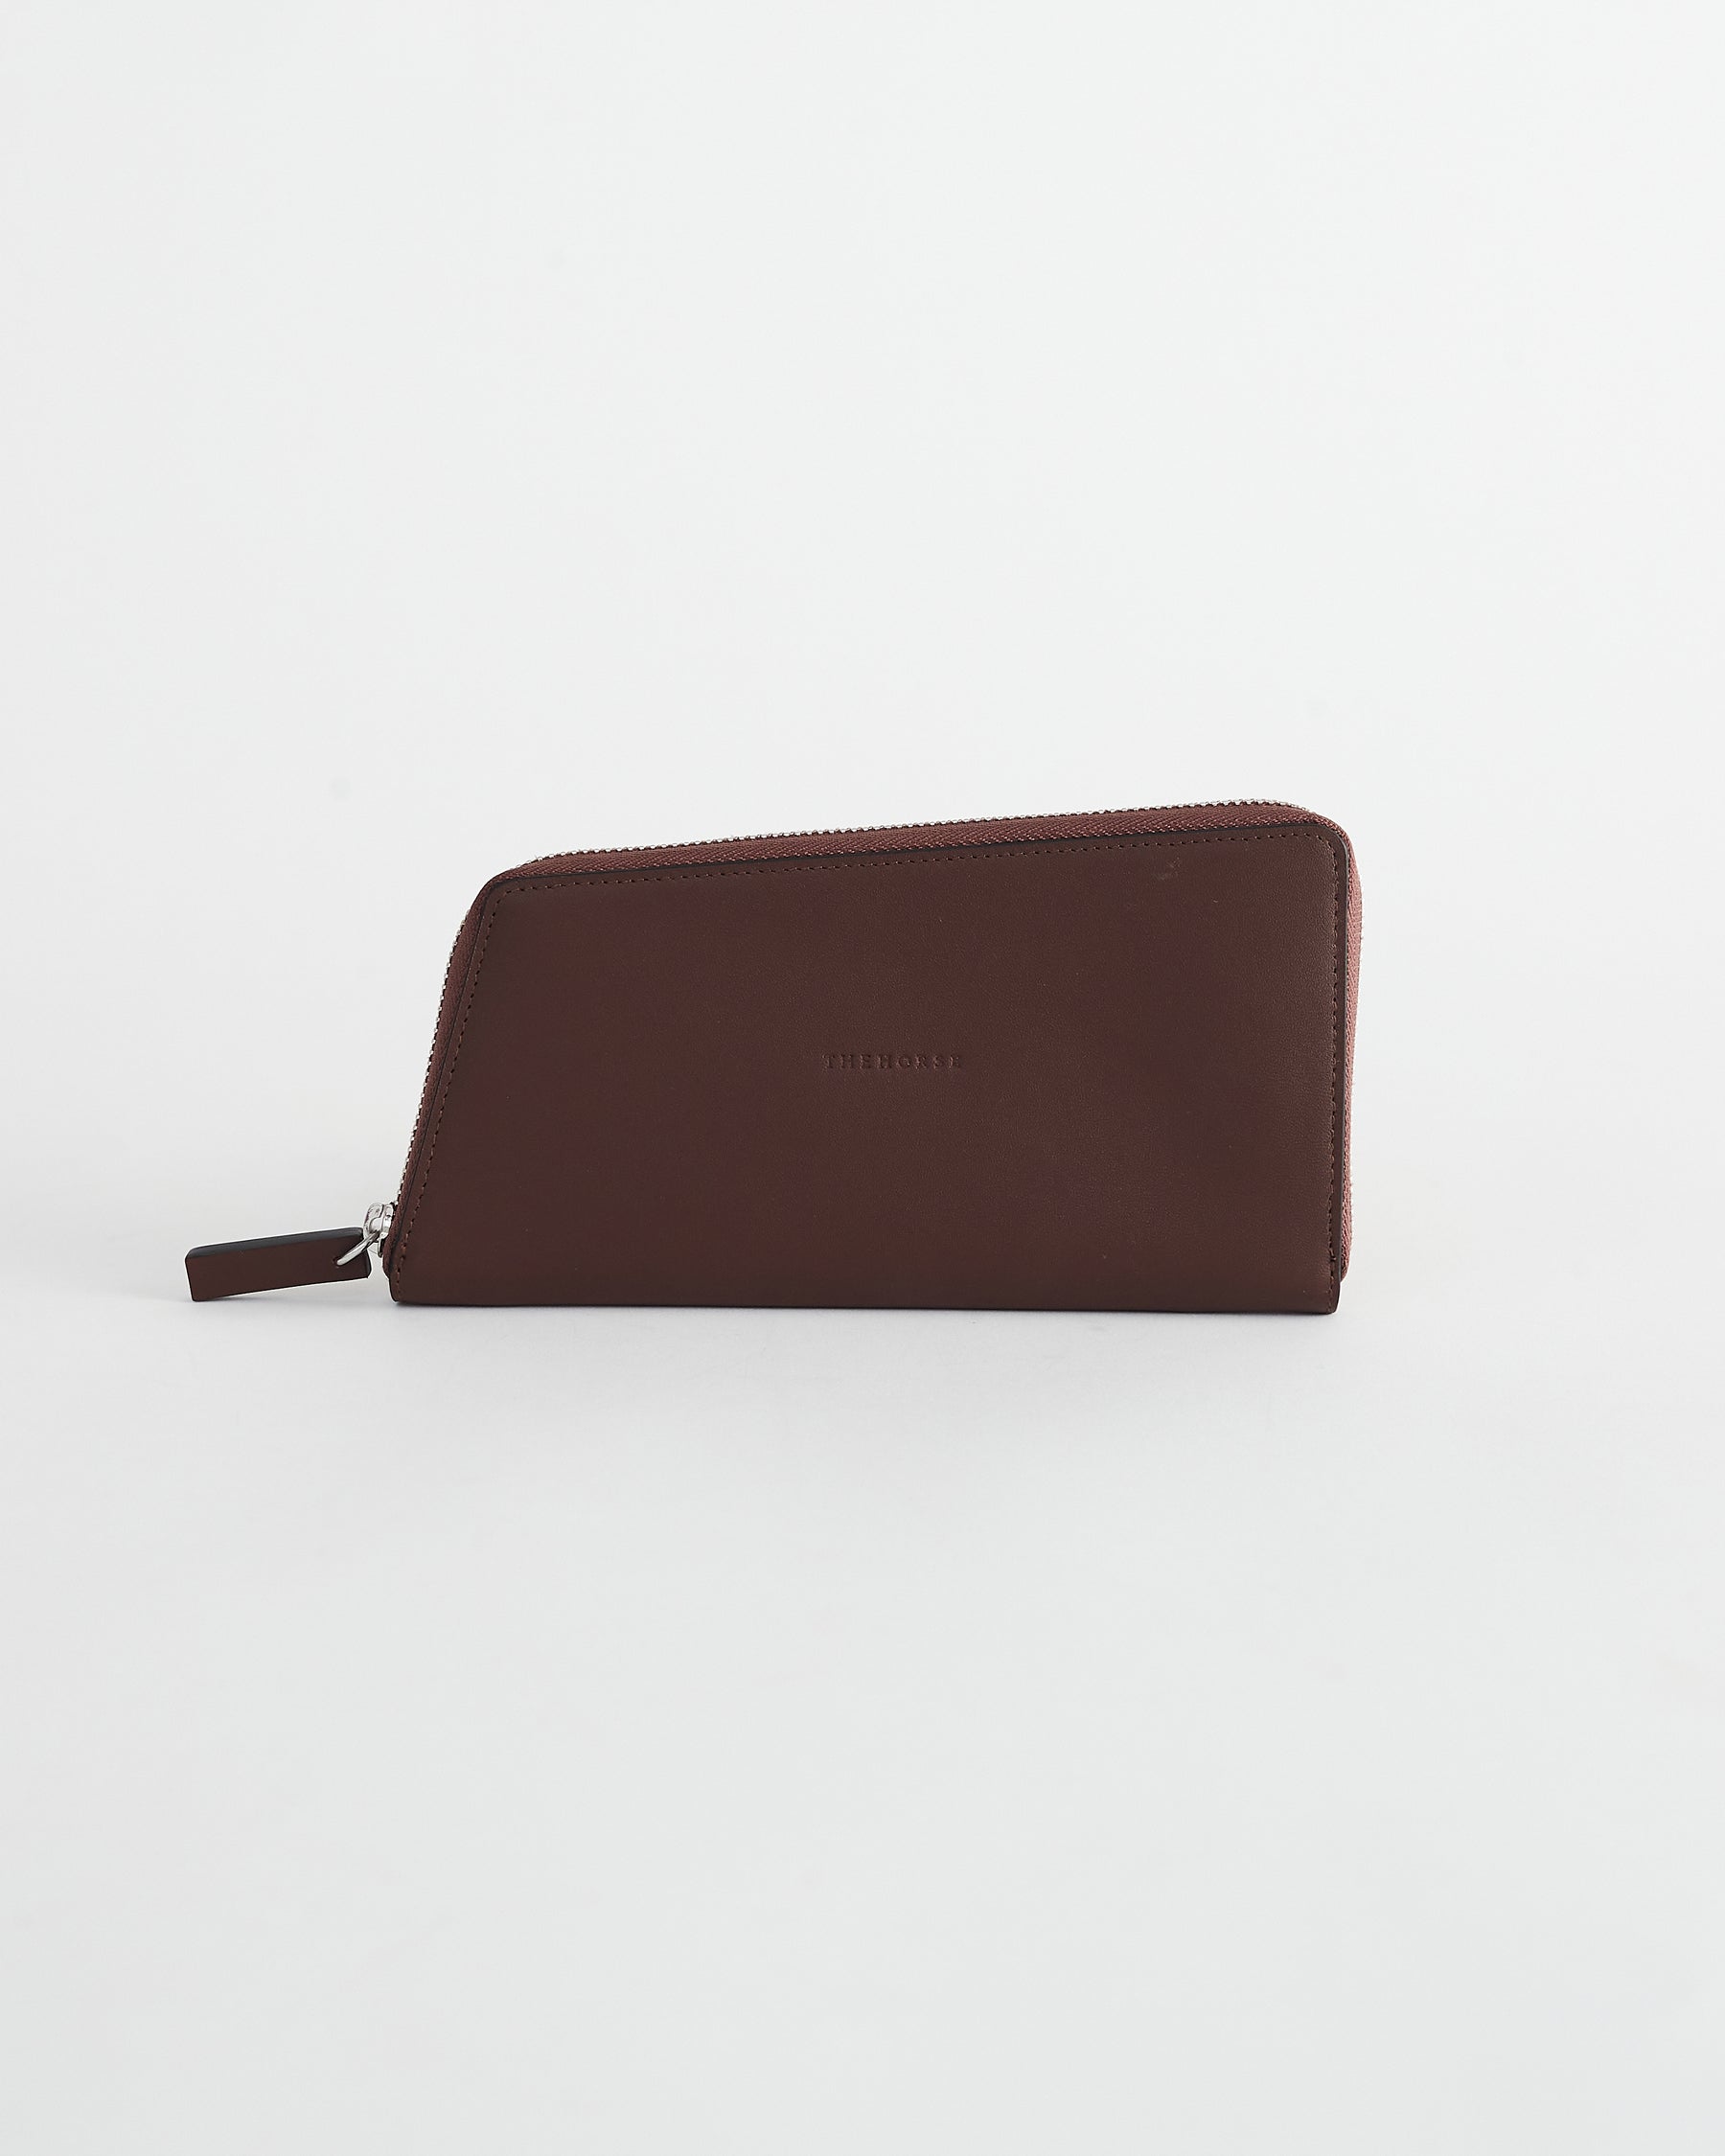 The Freddie Continental Large Zip Wallet in Coffee by The Horse®